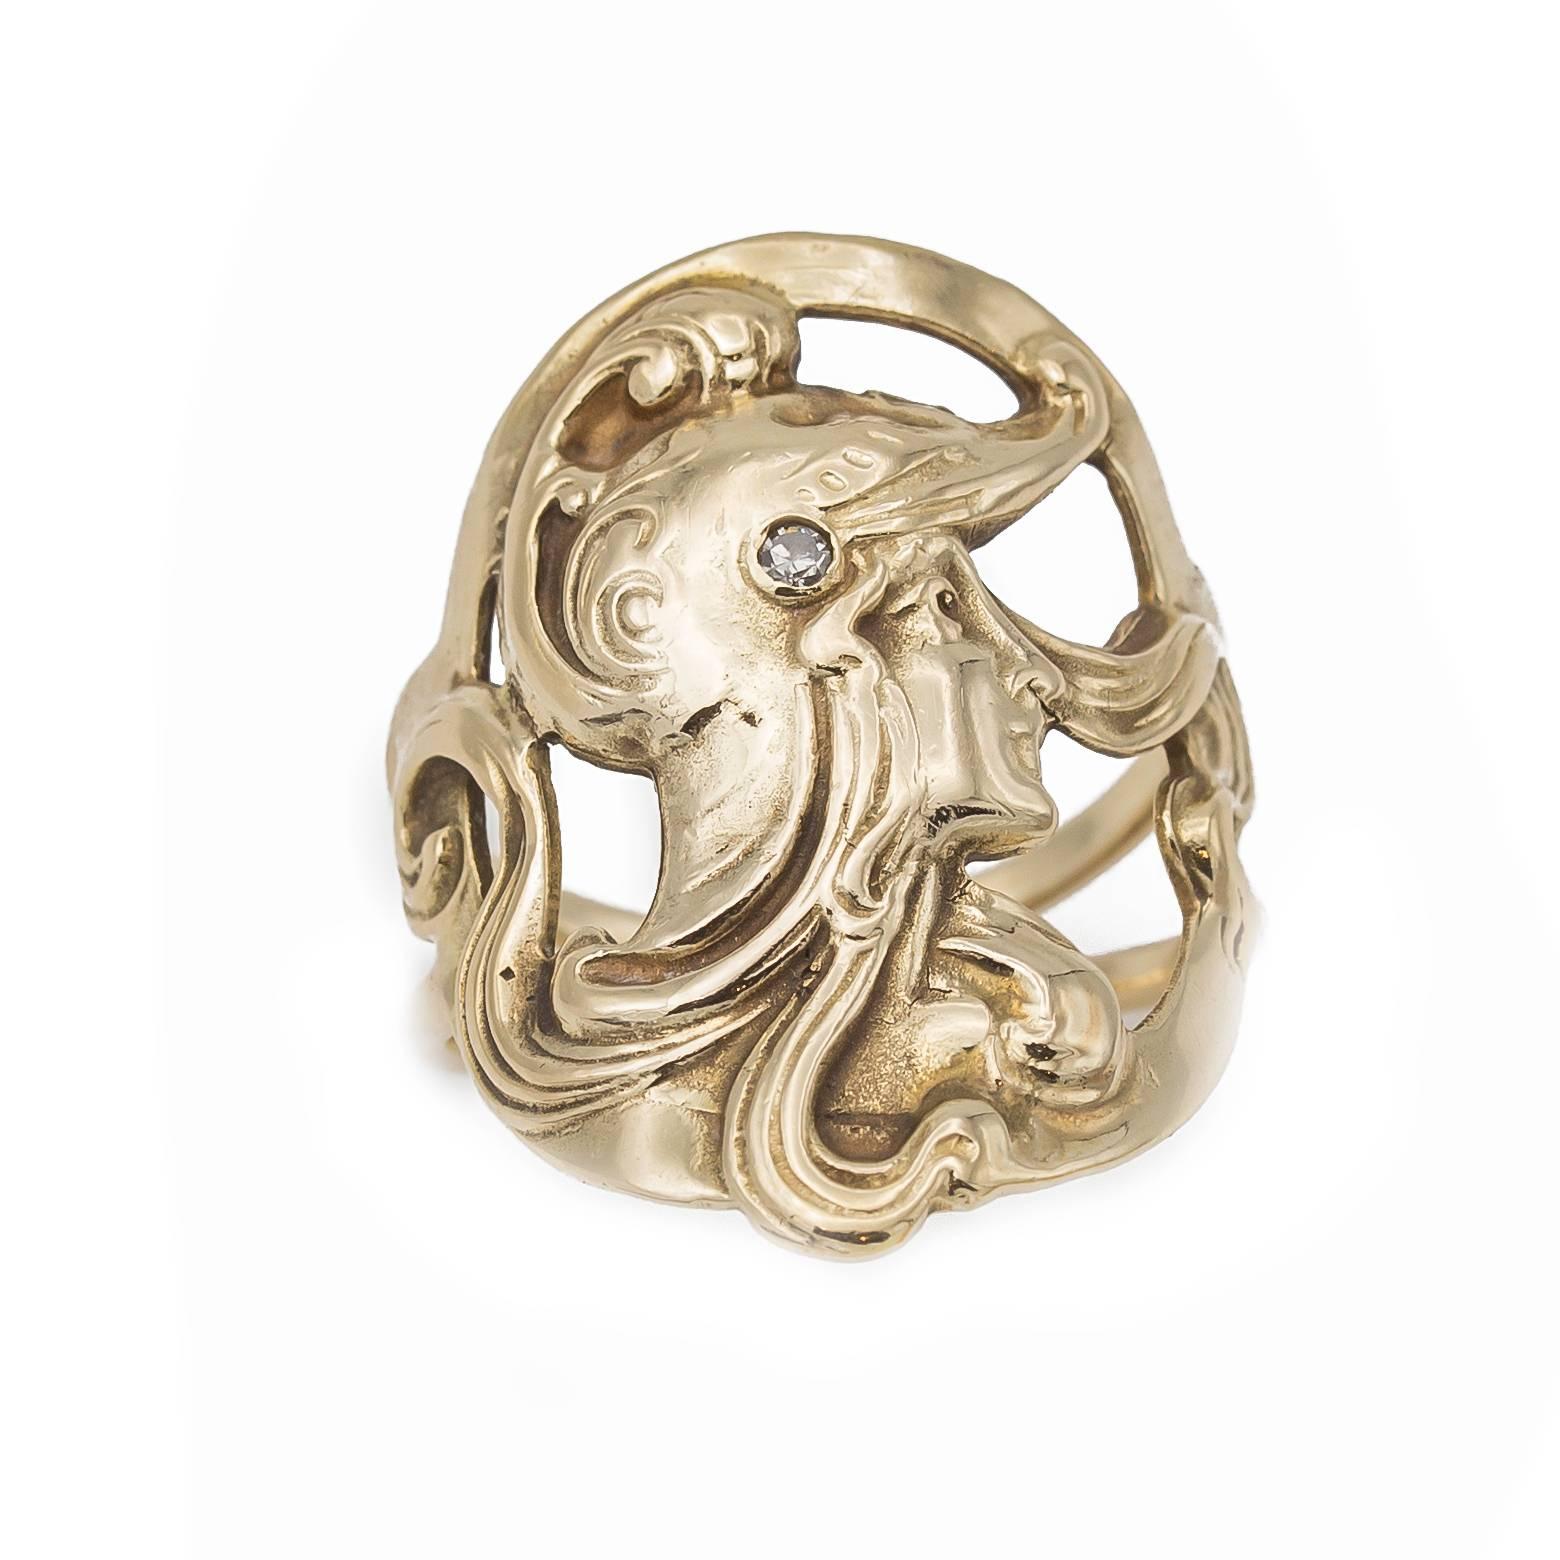 Women's Art Nouveau Style War Goddess Ring in Yellow Gold with Diamond